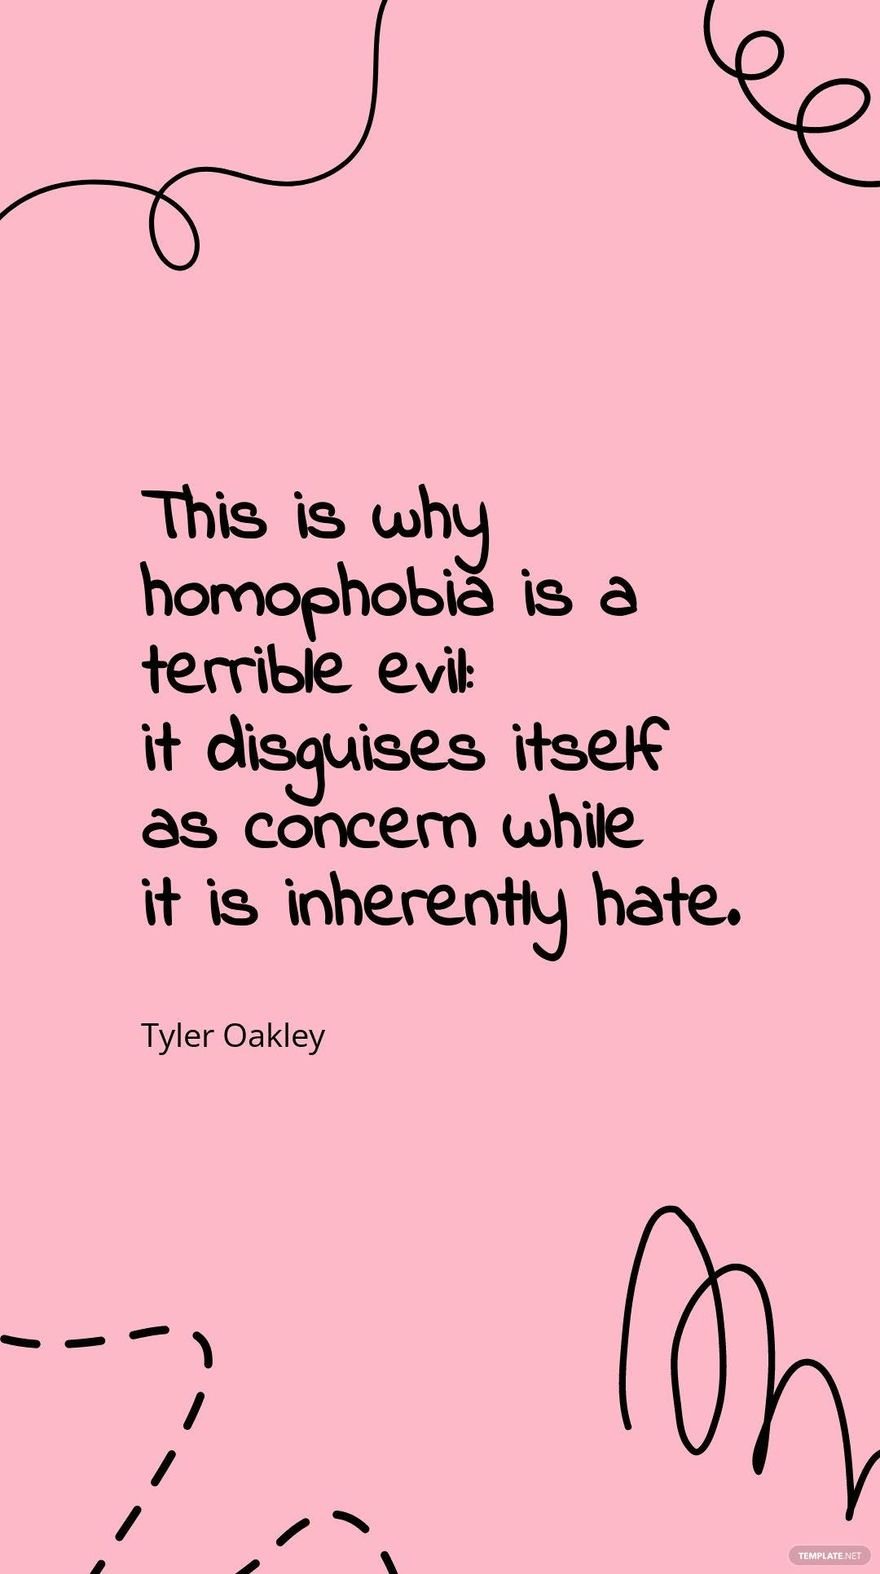 Tyler Oakley - This is why homophobia is a terrible evil: it disguises itself as concern while it is inherently hate.